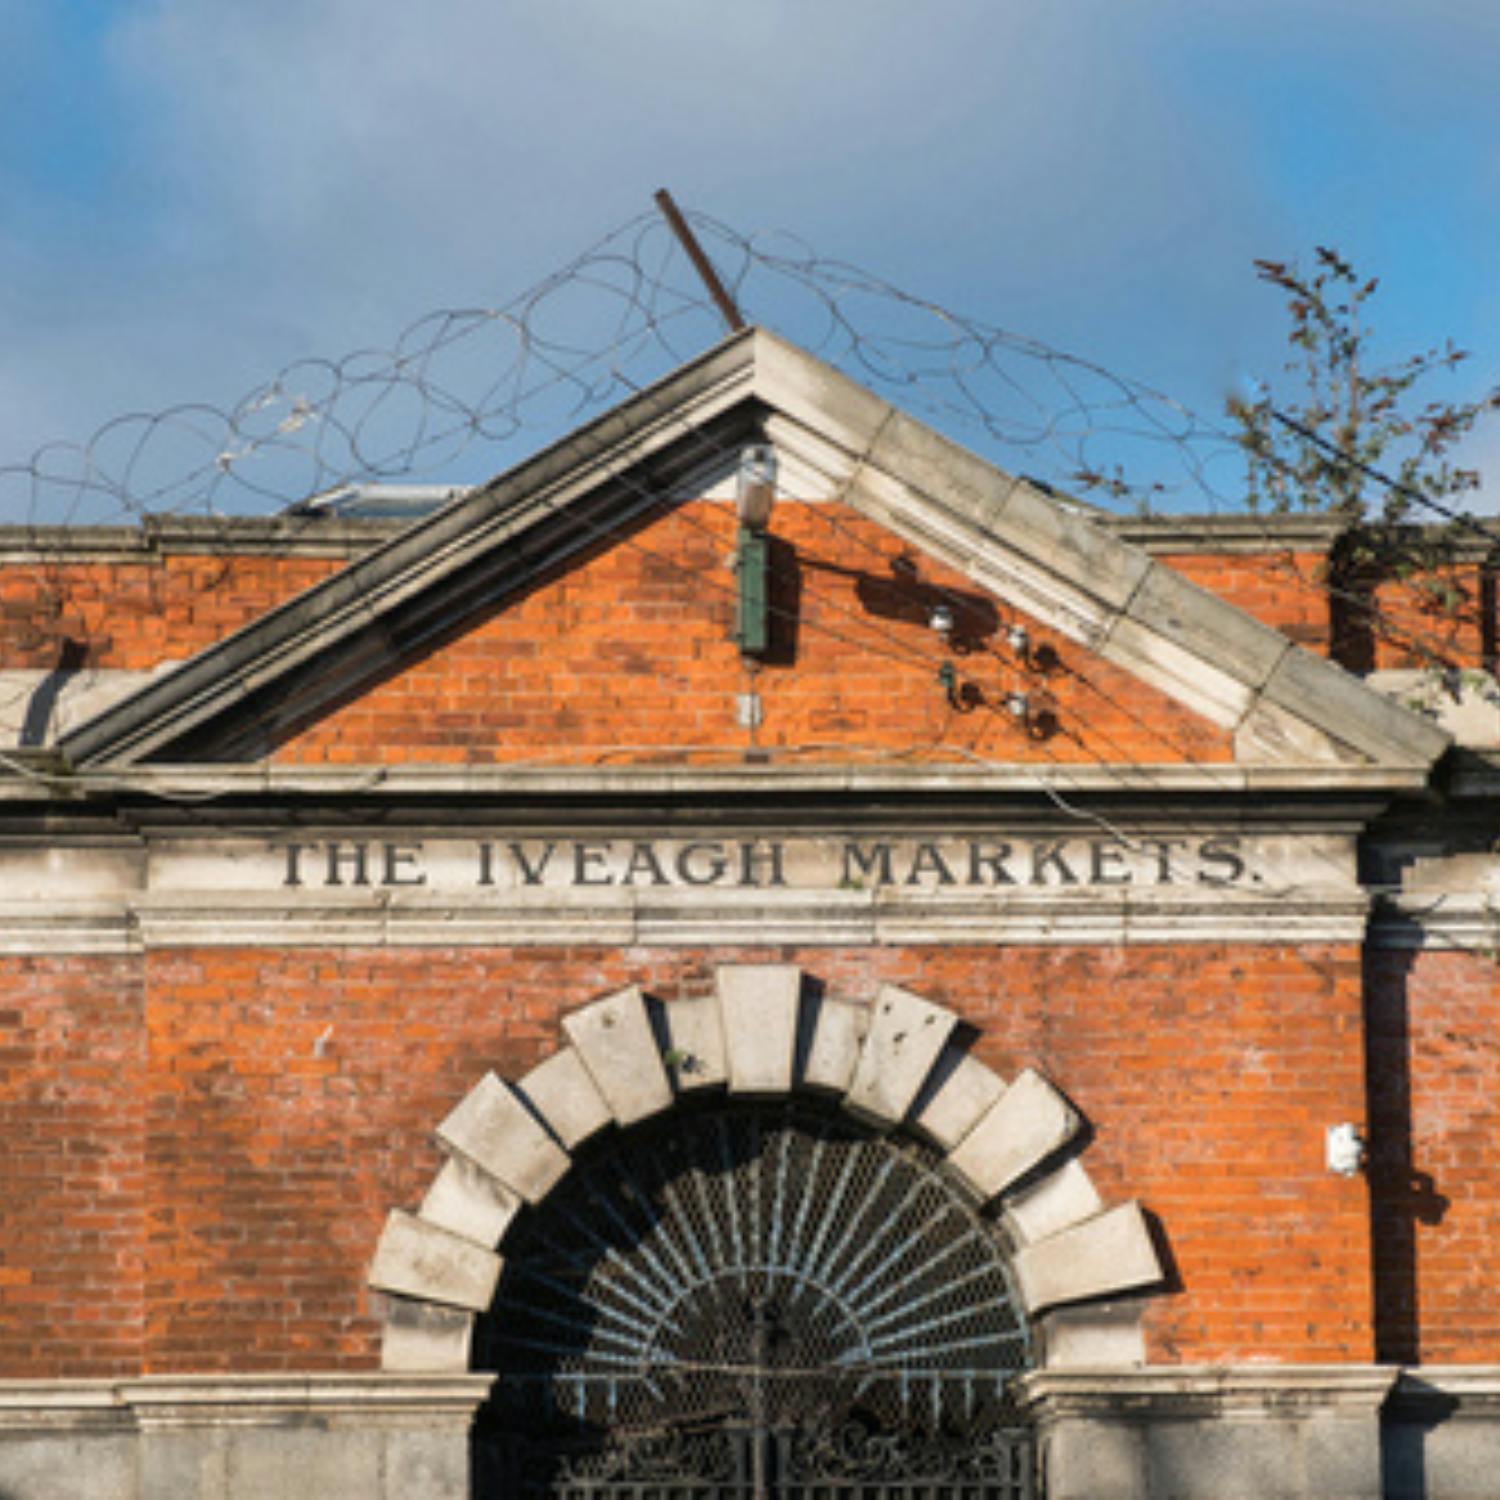 What should be done with Dublin's Iveagh Markets?